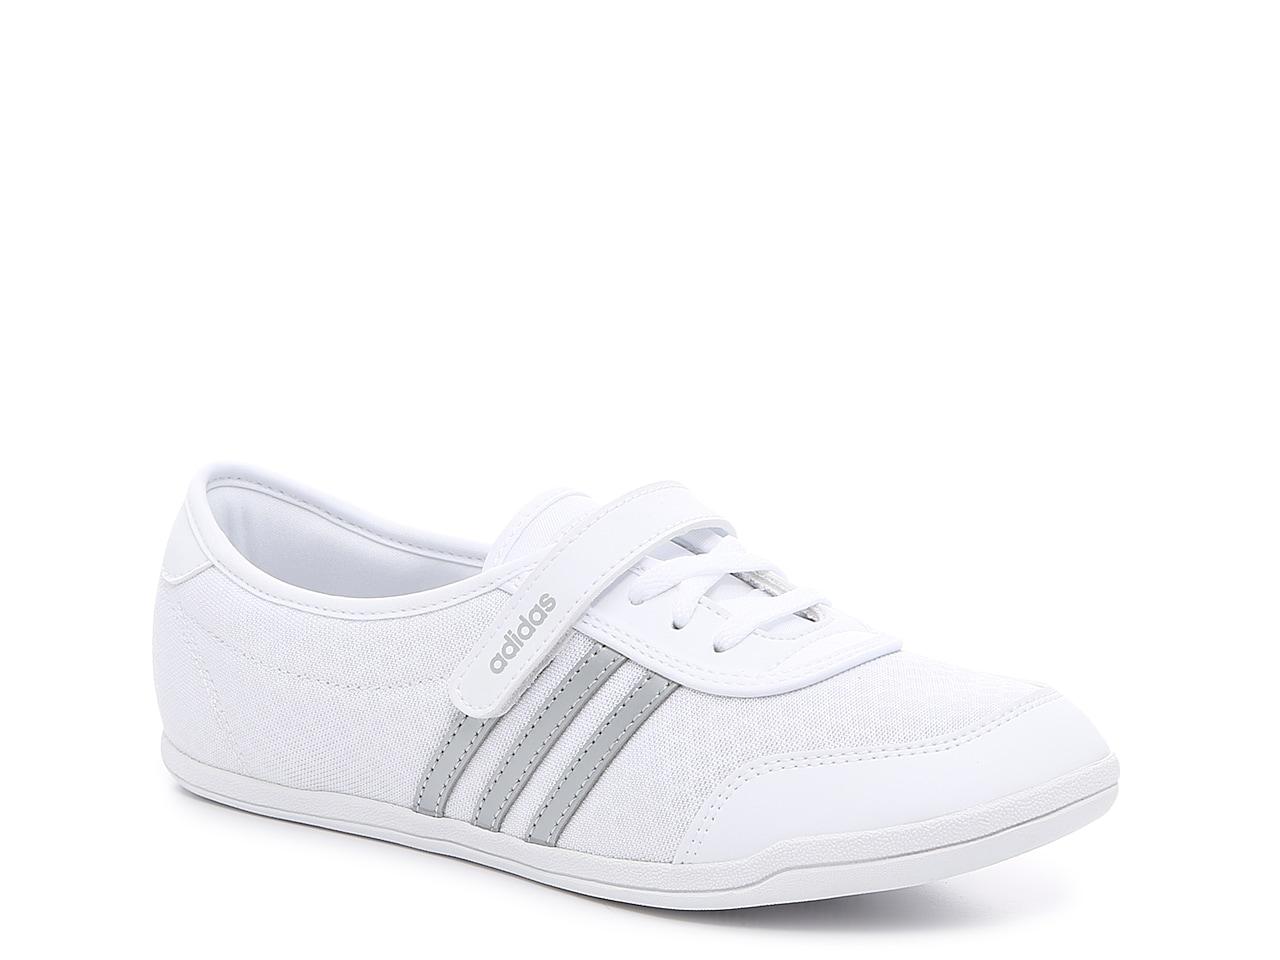 adidas Synthetic Diona Slip-on Sneaker in White | Lyst